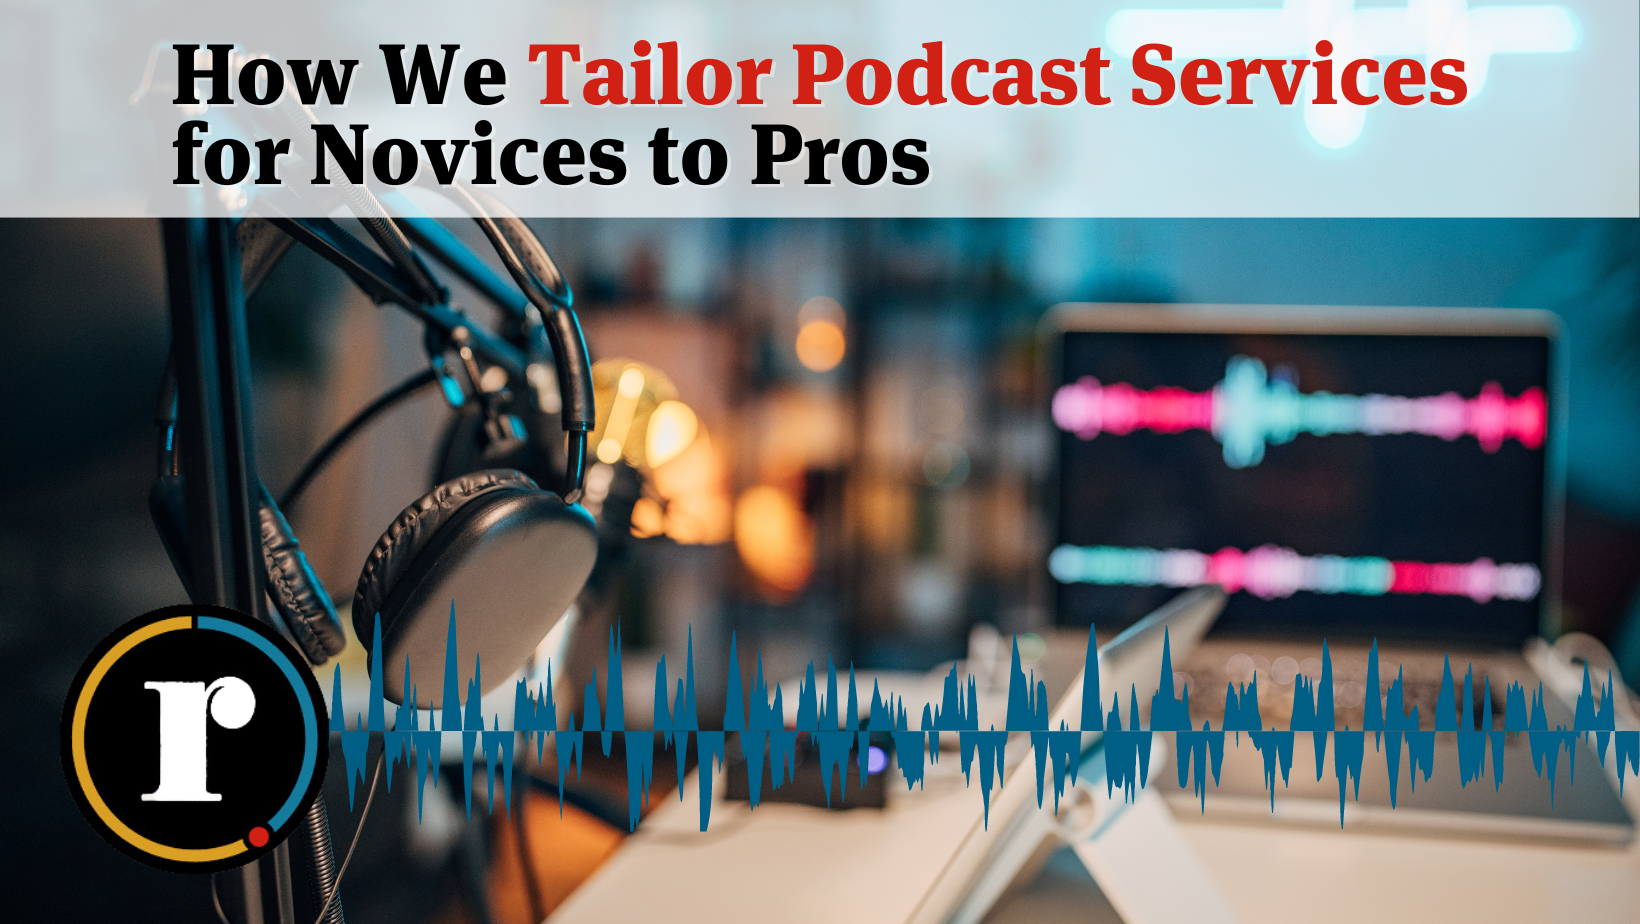 How We Tailor Podcast Services for Novices to Pros